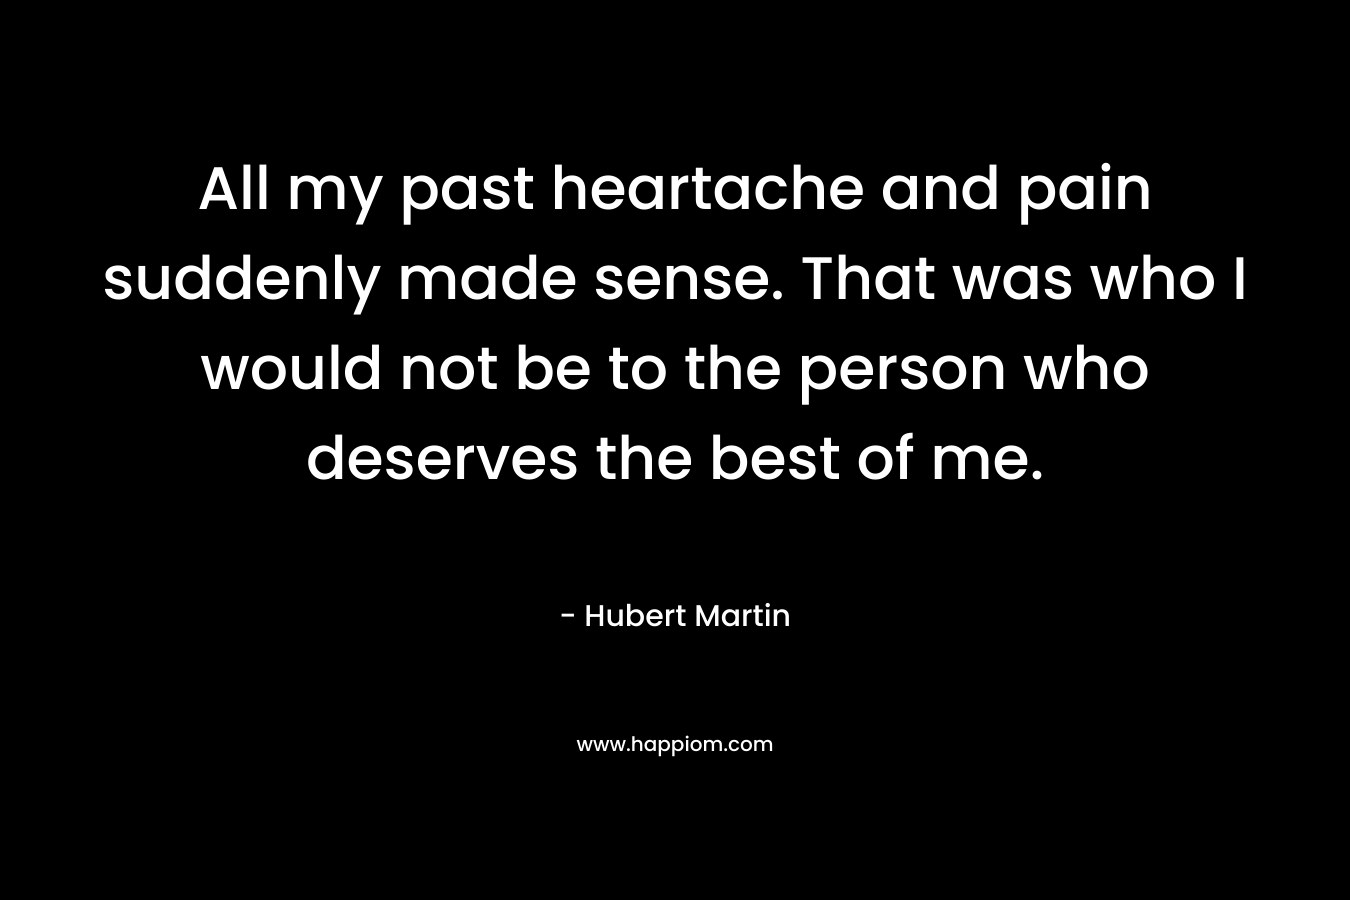 All my past heartache and pain suddenly made sense. That was who I would not be to the person who deserves the best of me.